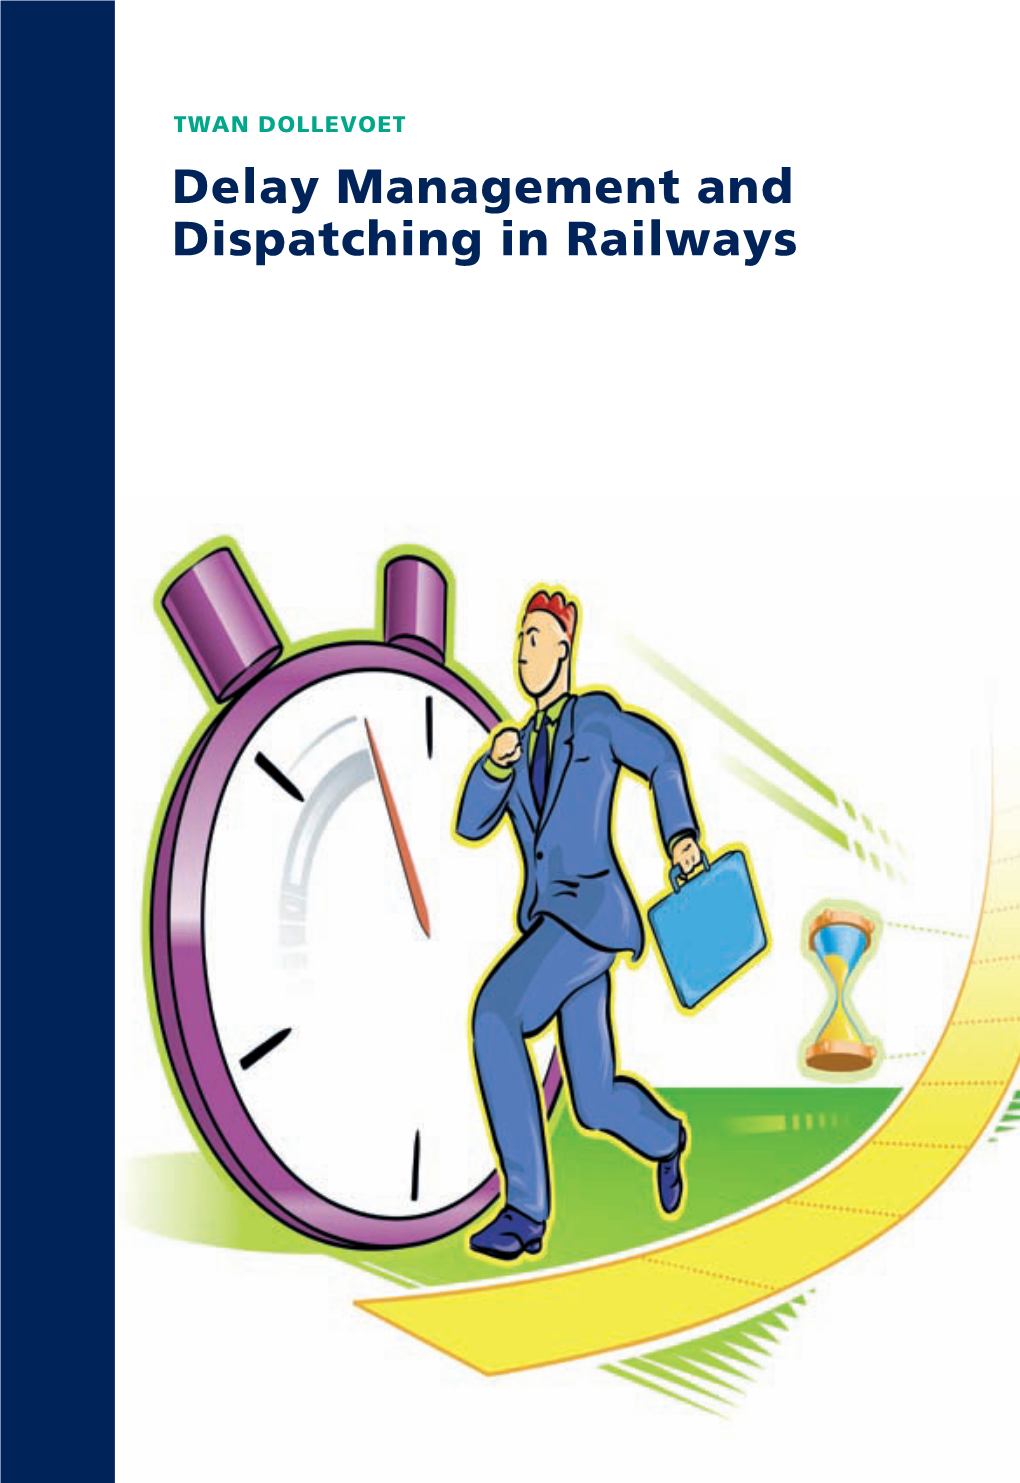 DELAY MANAGEMENT and DISPATCHING in RAILWAYS 272 TWAN DOLLEVOET Passenger Railway Transportation Plays a Crucial Role in the Mobility in Europe